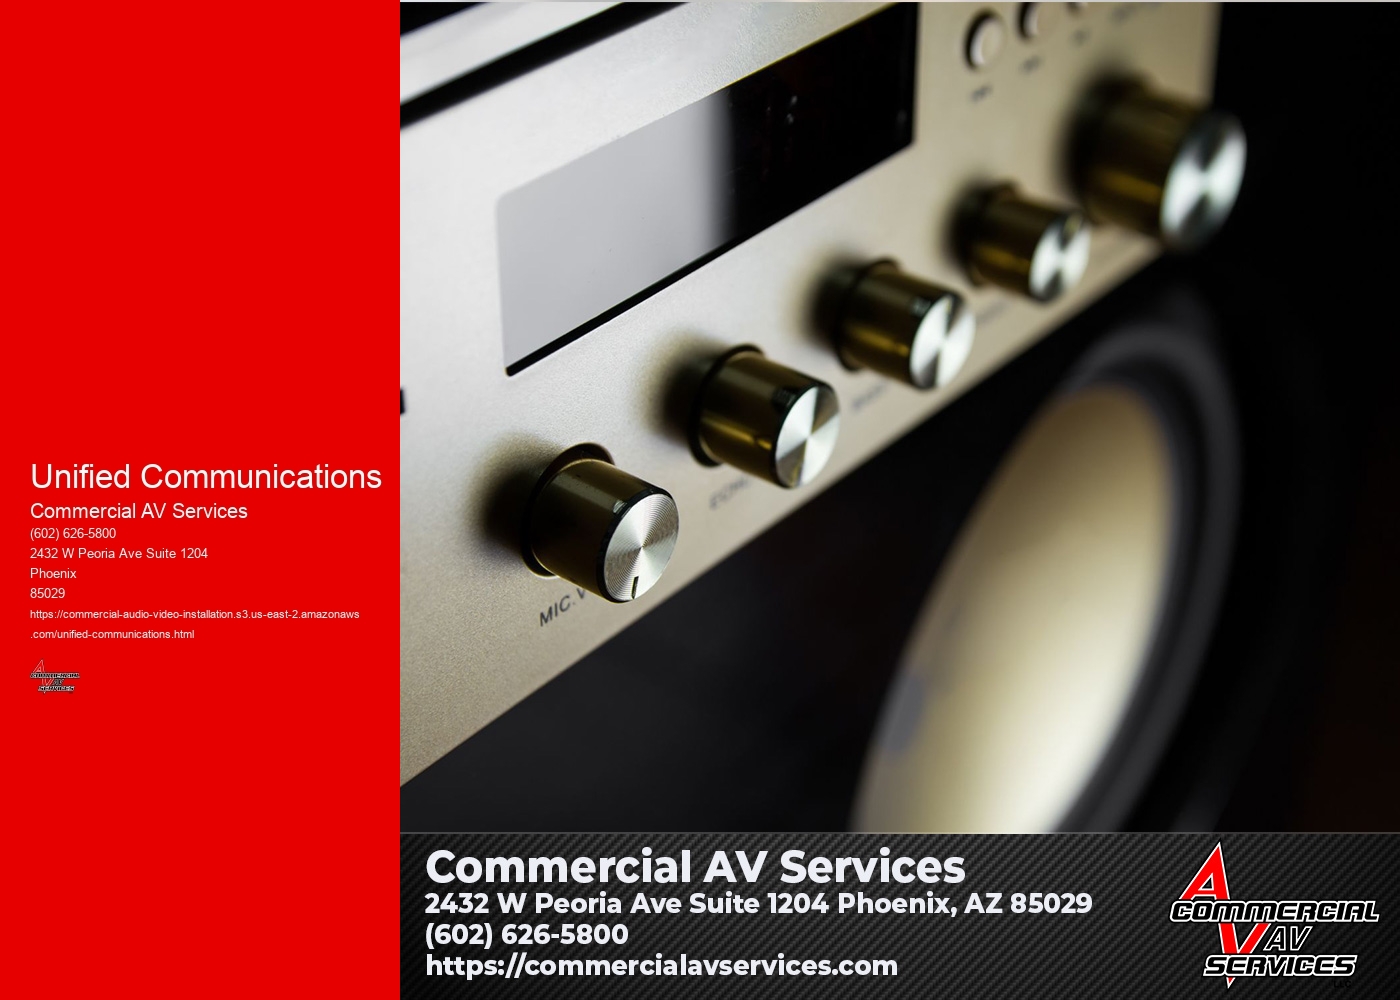 What are the key features and benefits of a unified communications system?